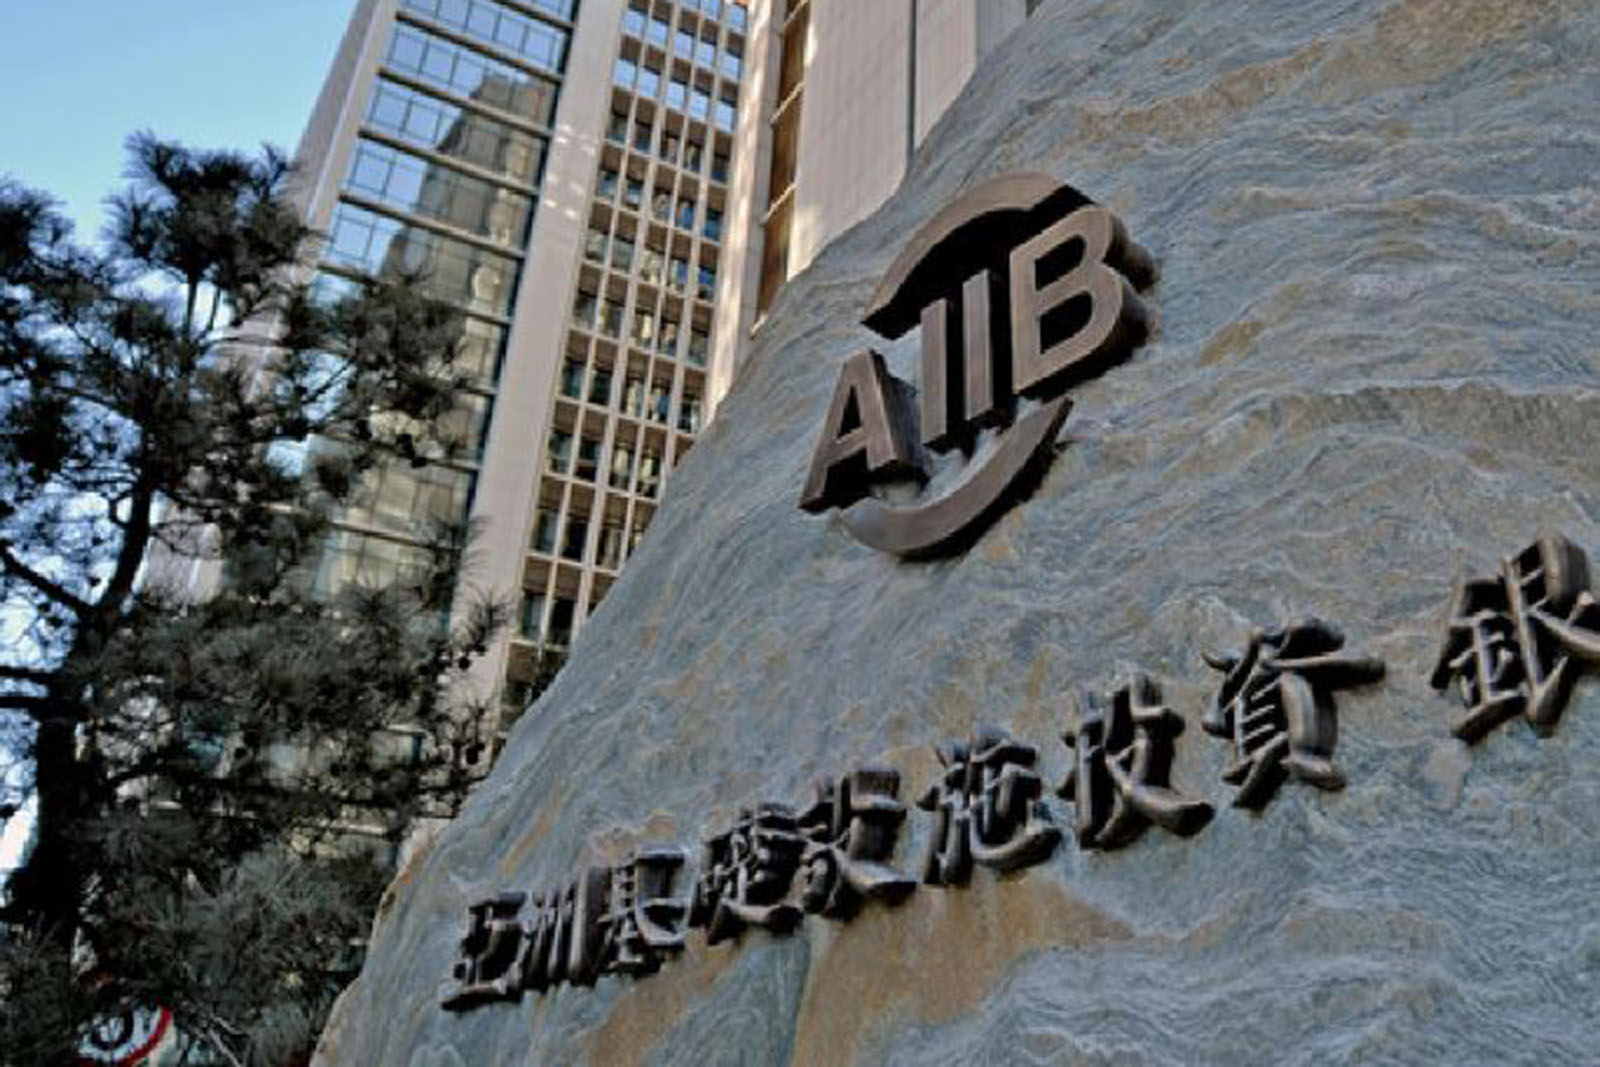 59 Chinese apps ban : AAP questions  AIIB China 750mUS$  Loan  status quo